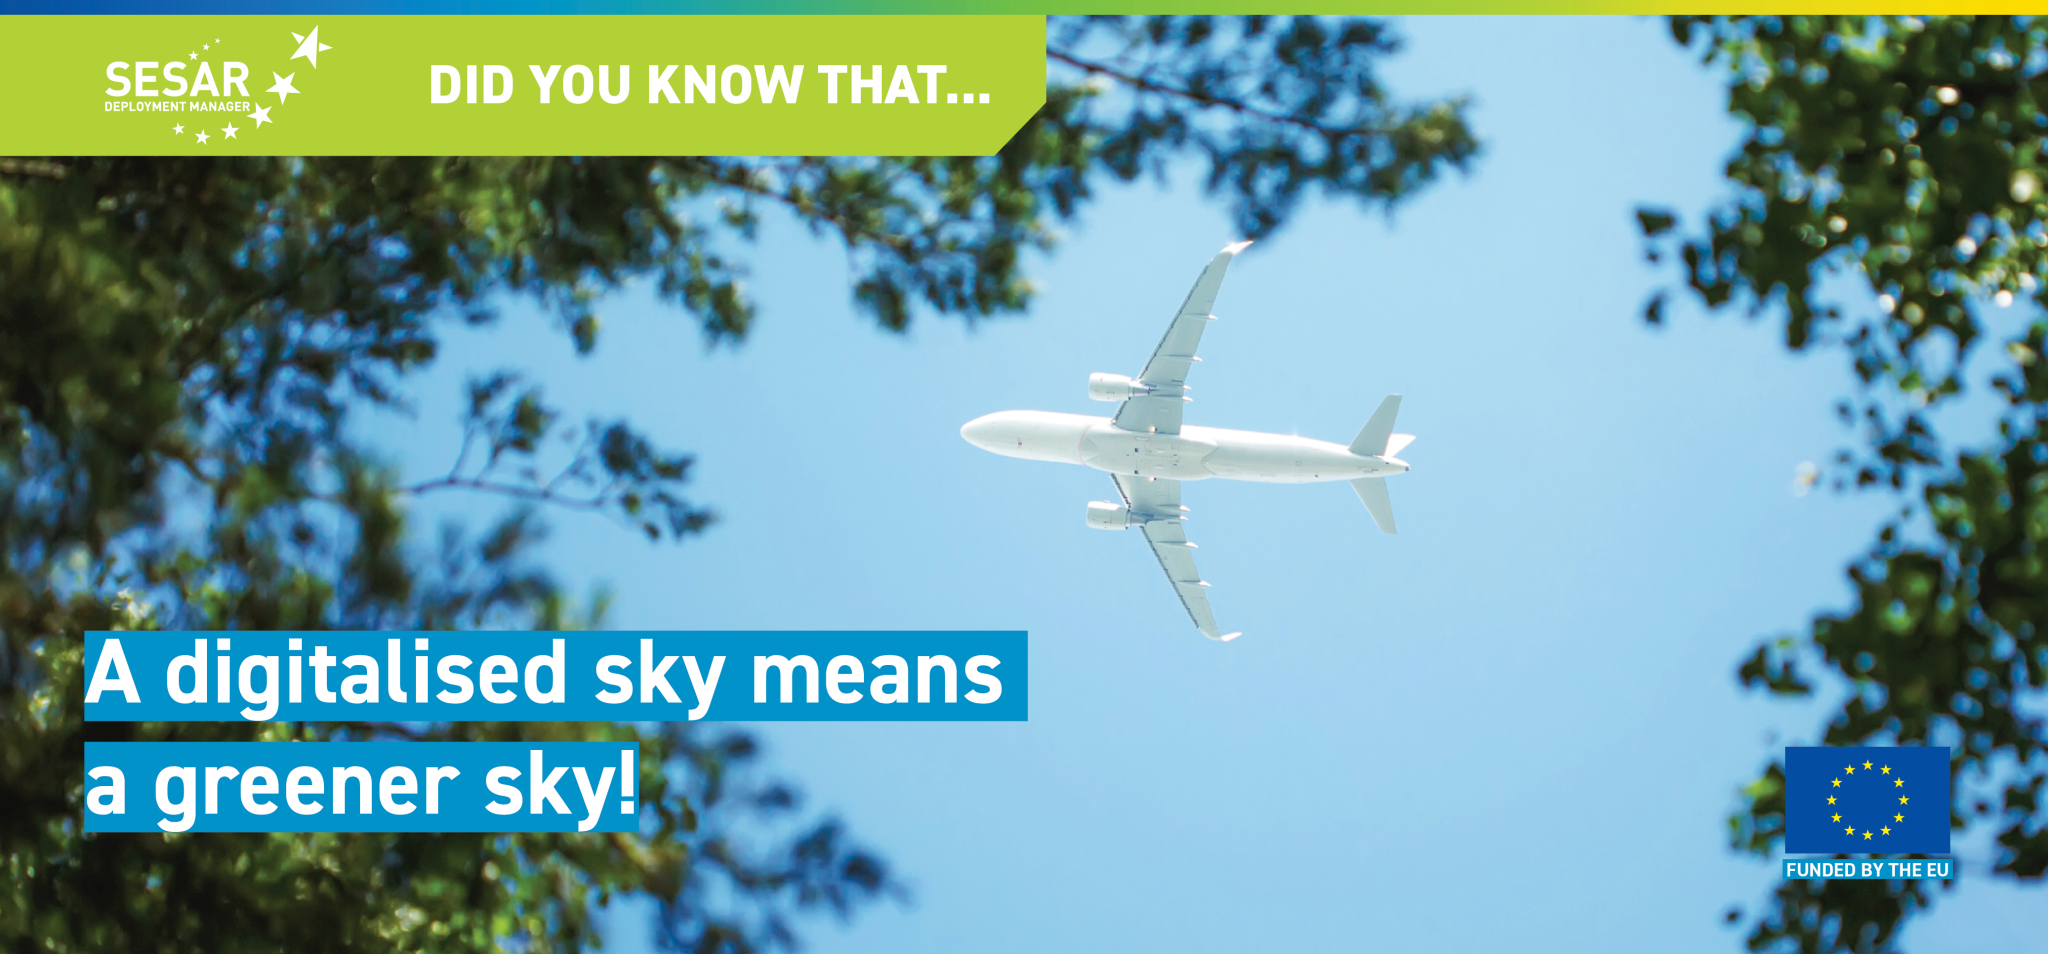 Did you know that... A digitalised sky means a greener sky! #DYKT